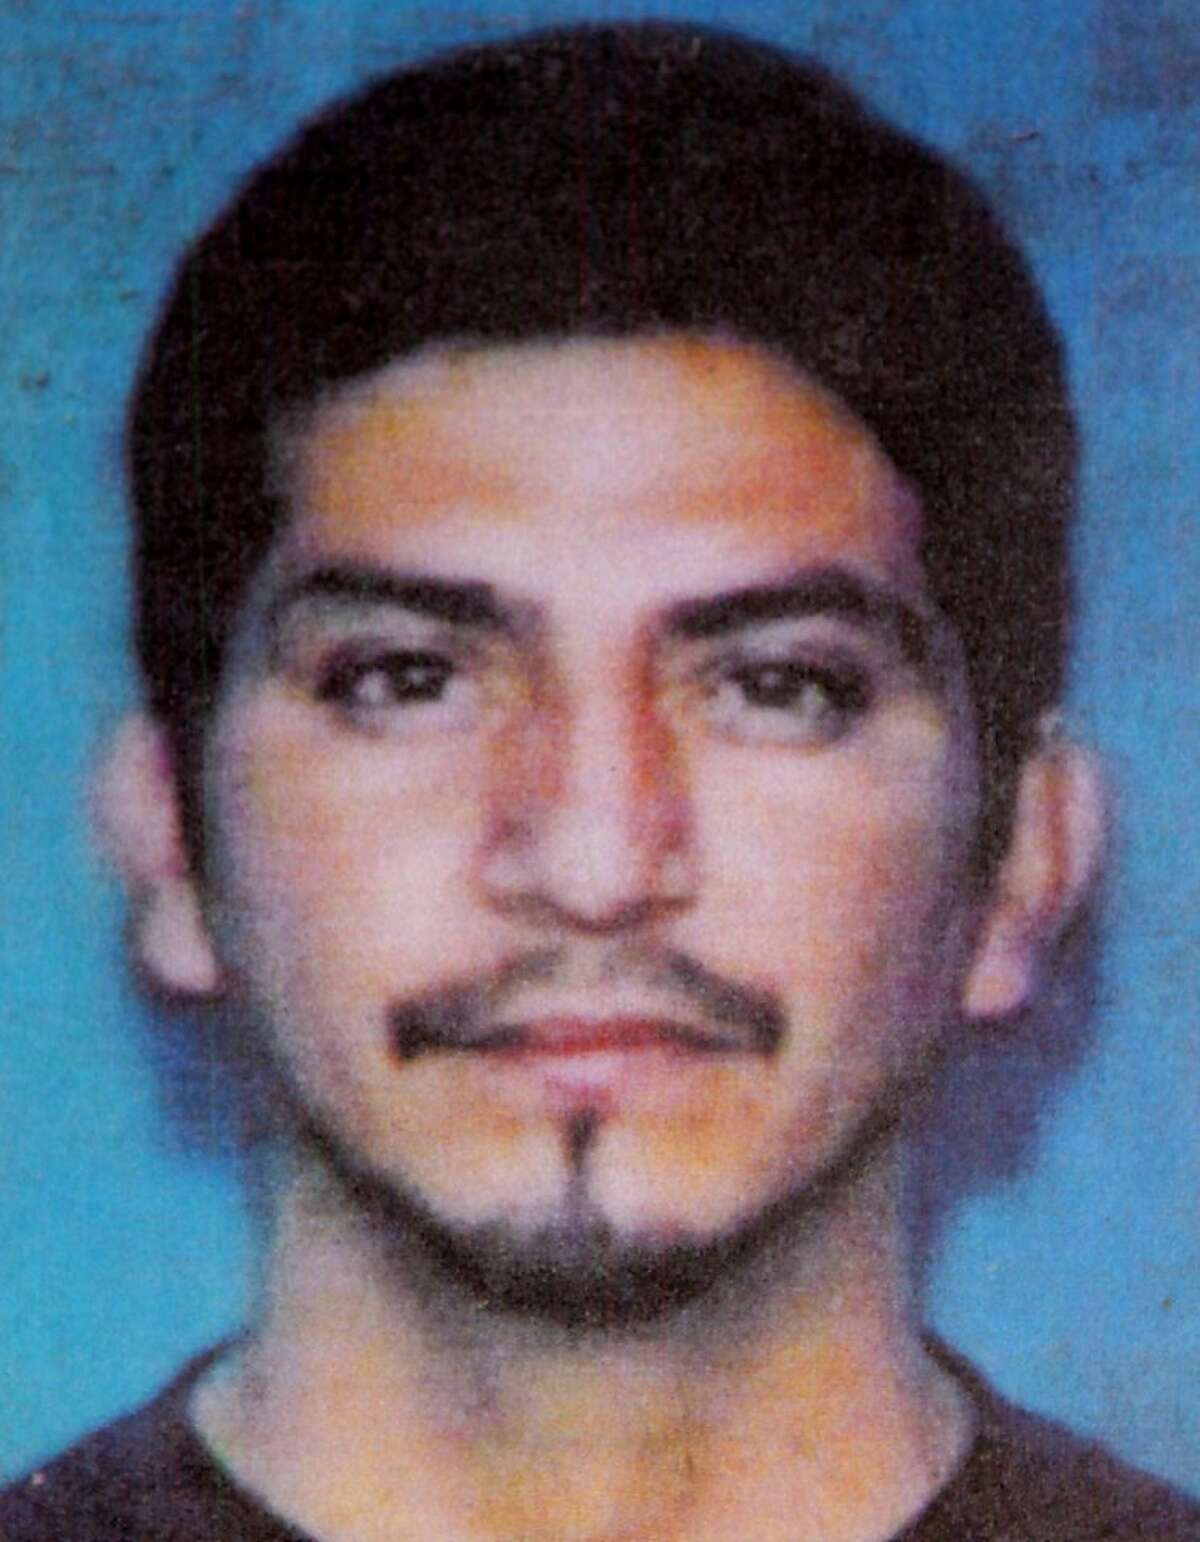 This is a photo of Jerry Amaro, who was killed after a scuffle with the Oakland Police nine years ago.